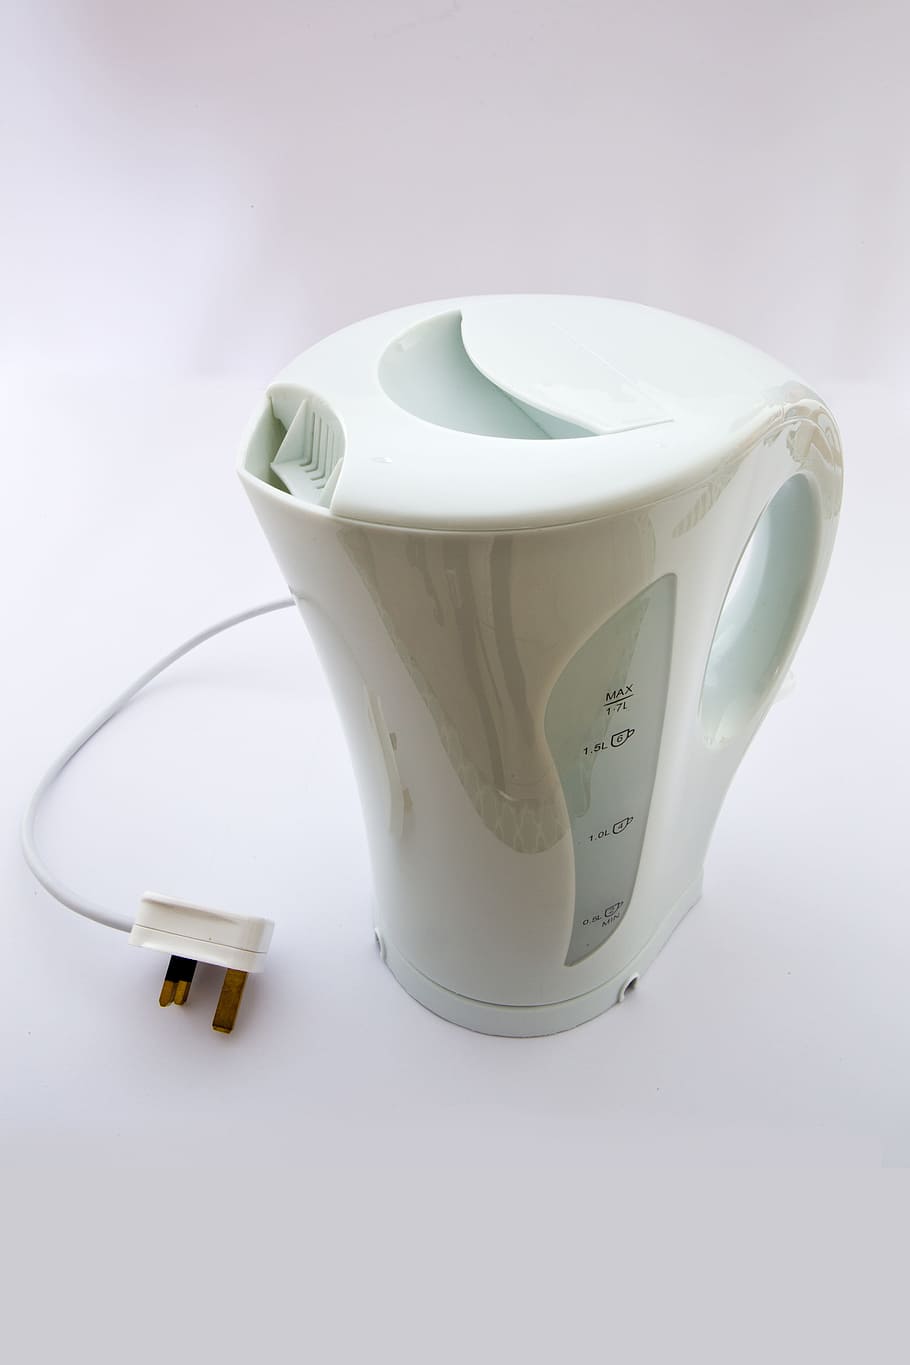 white electric kettle, Electric Kettle, Plastic, White, Utensil, teakettle, boiling, hot water, cup, drink